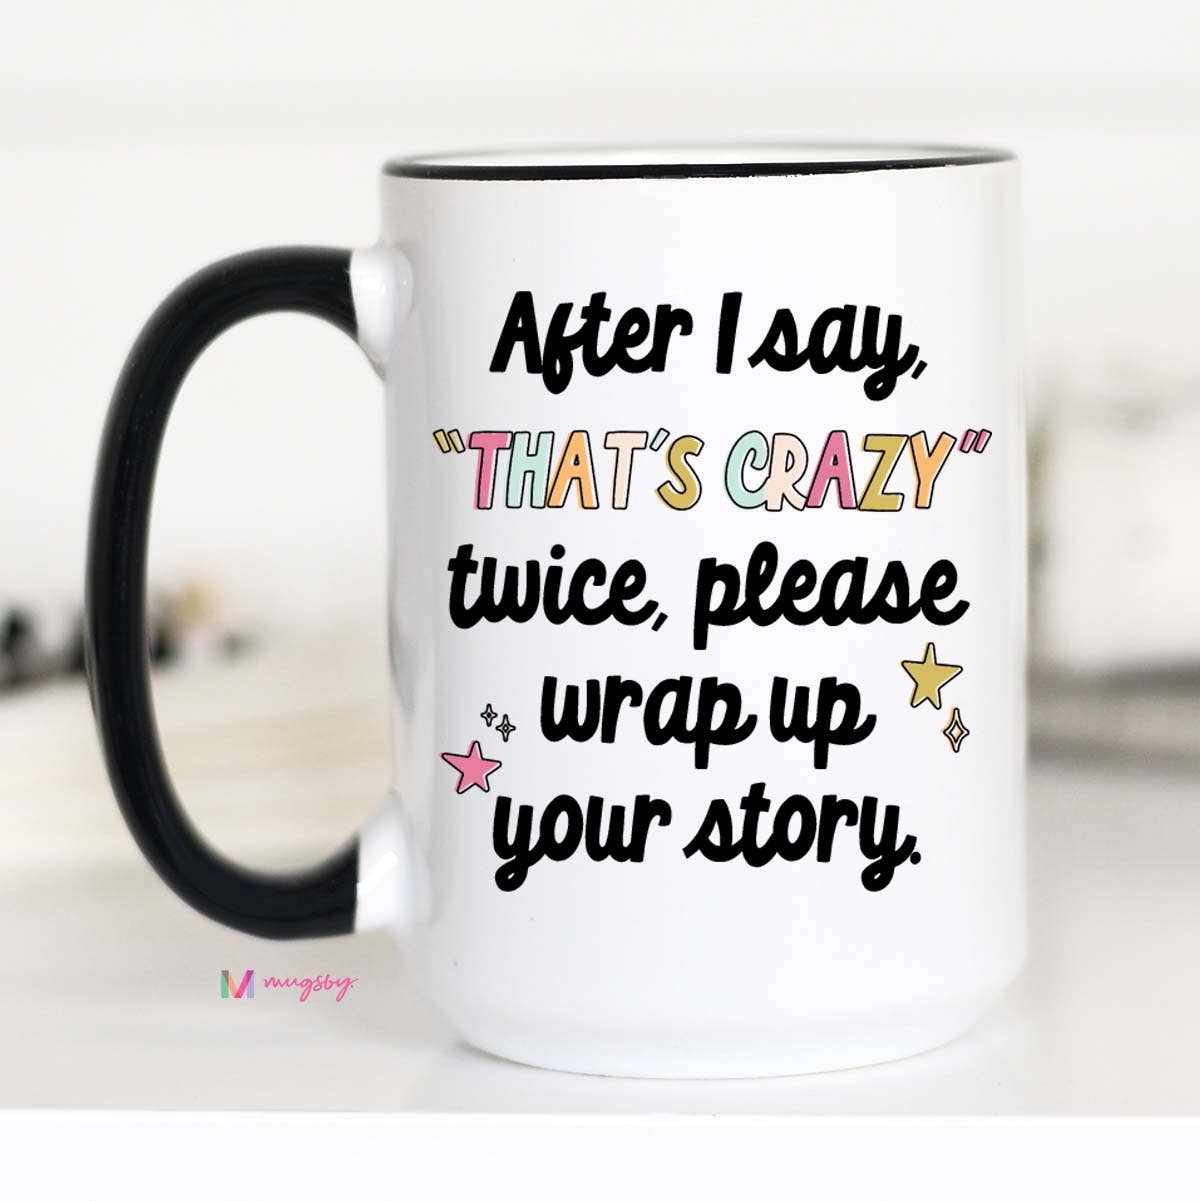 After I say that's crazy please wrap up Funny Coffee Mug: 11oz